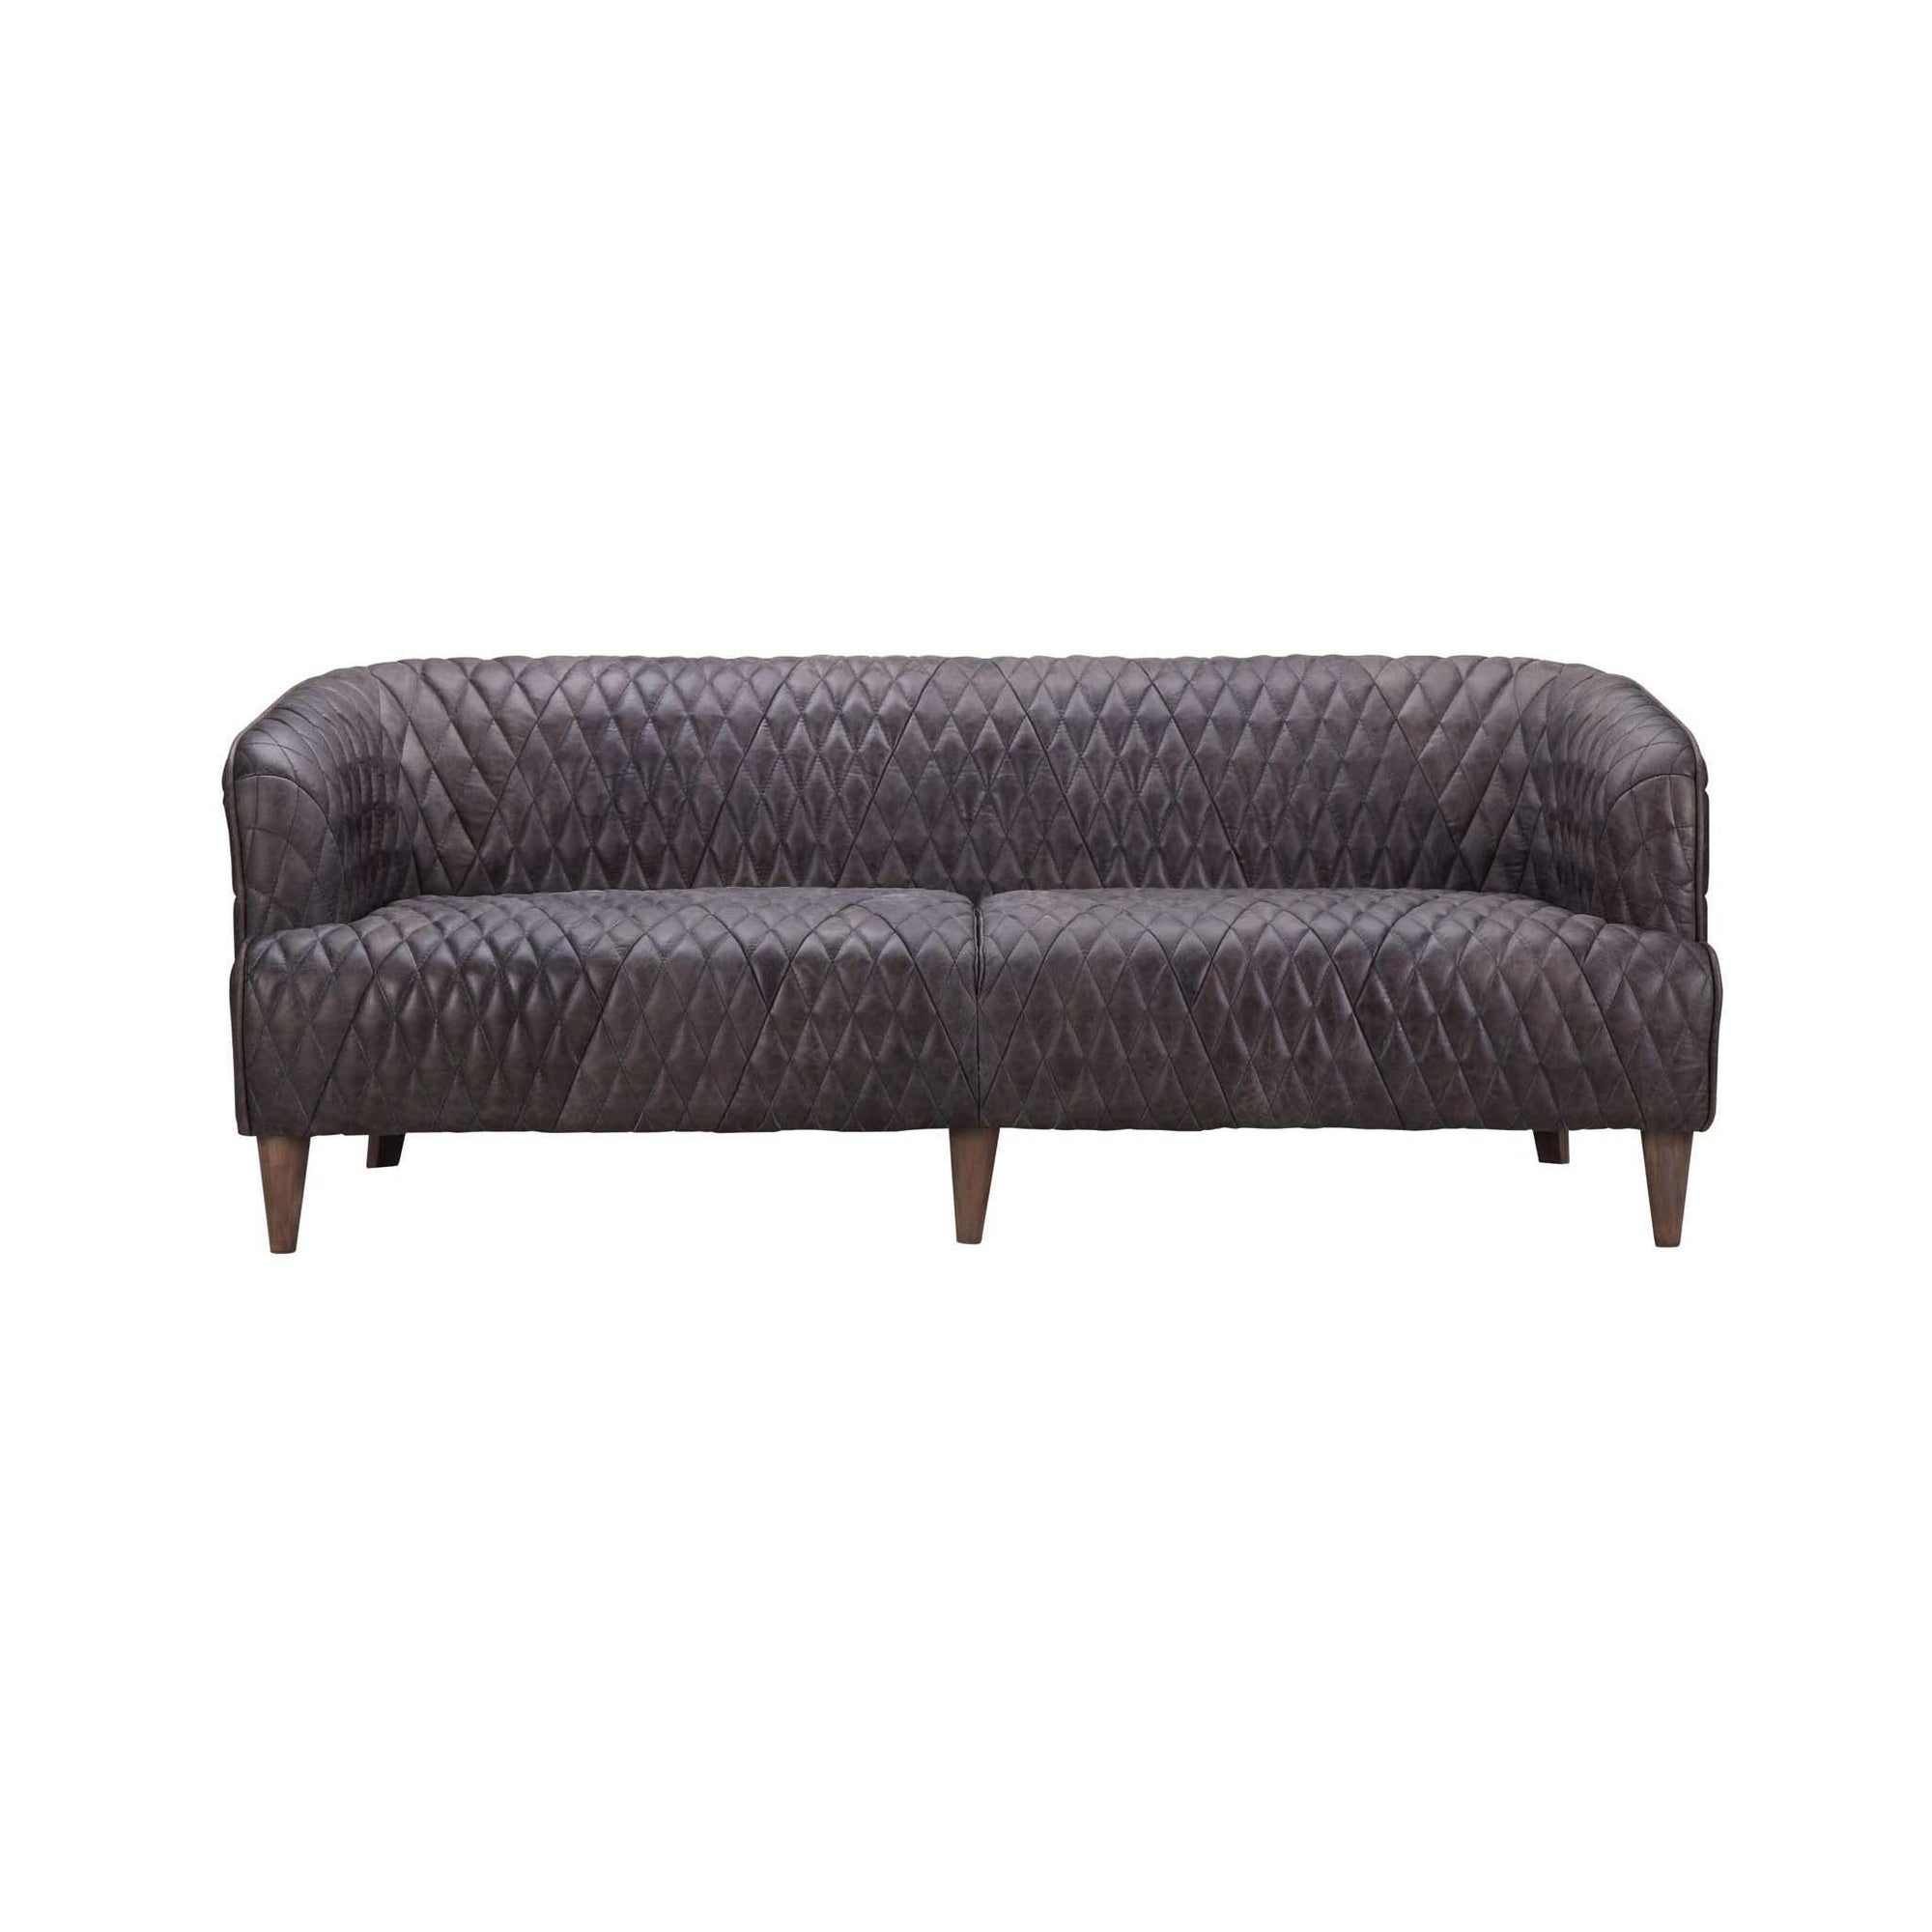 MOES-MAGDELAN TUFTED LEATHER SOFA-Sofas-MODTEMPO